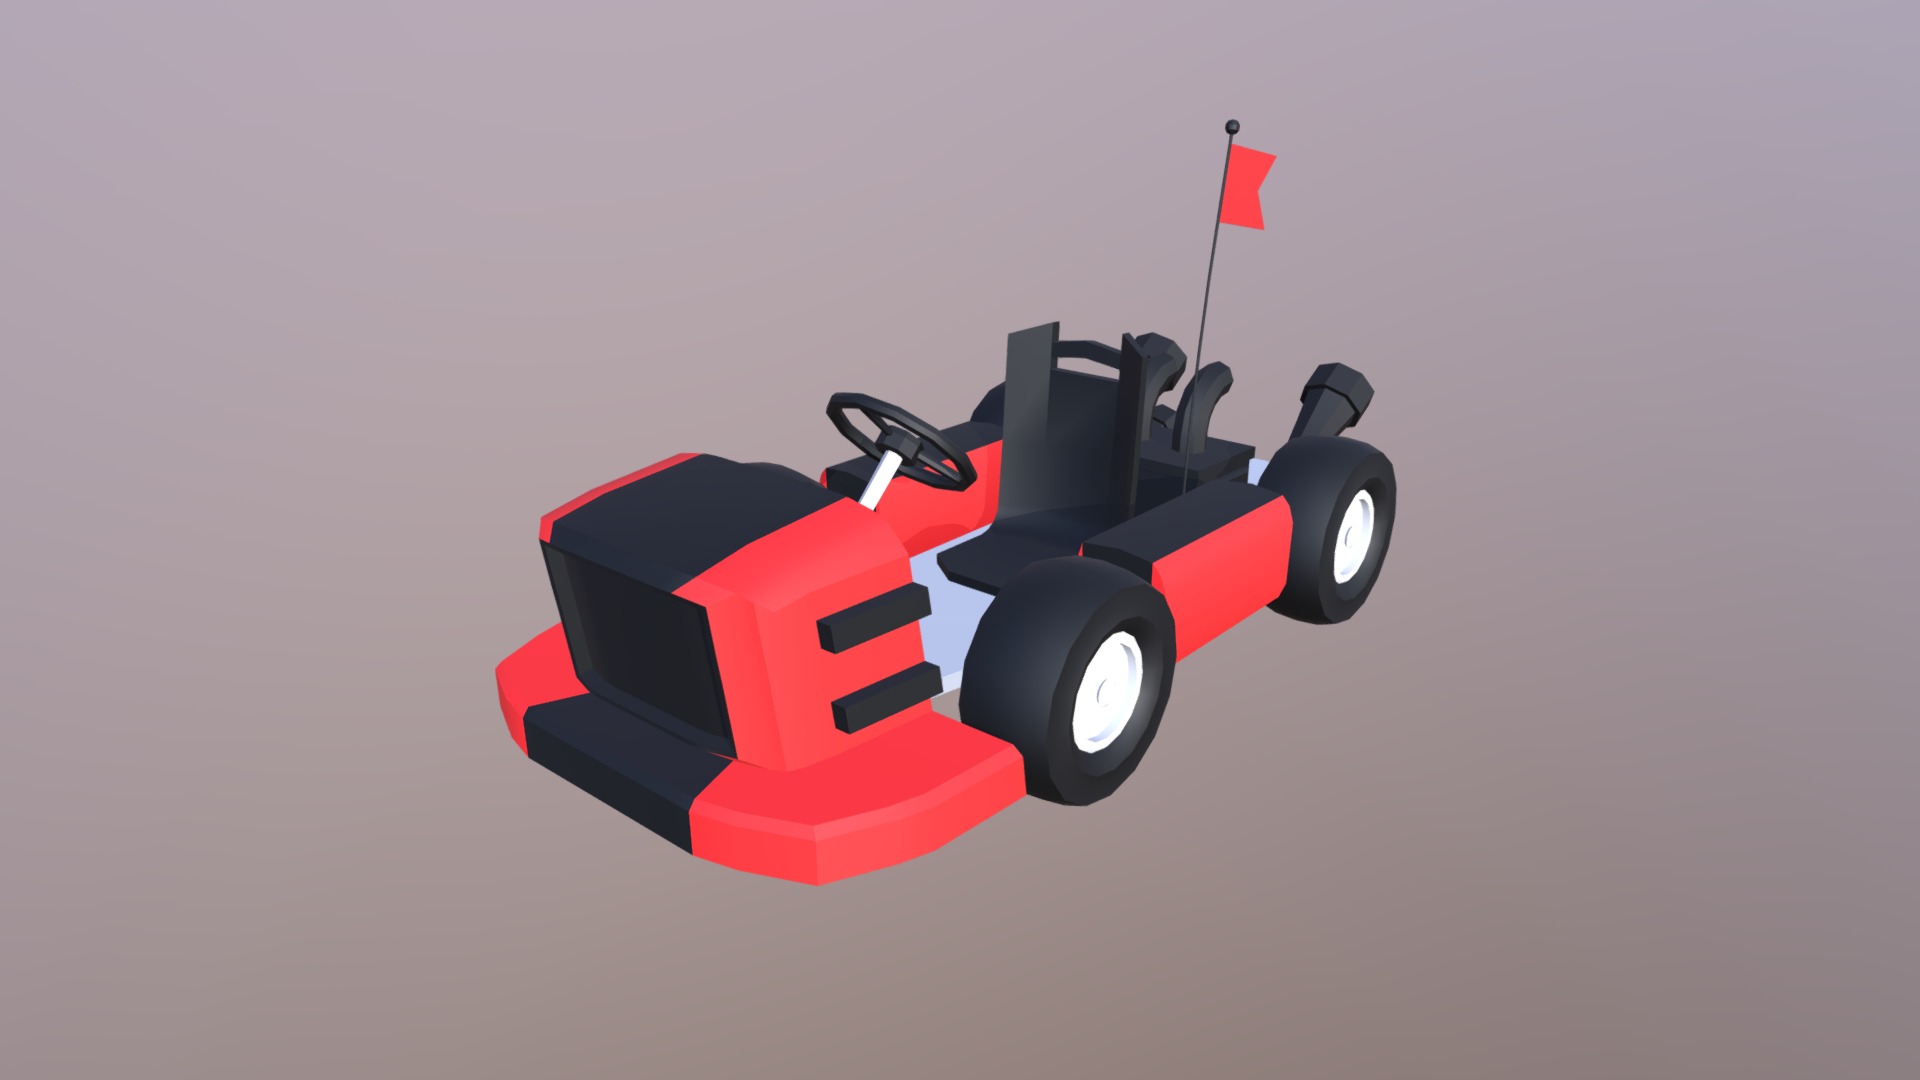 3D model Off Road Mini Kart 3 – Low Poly - This is a 3D model of the Off Road Mini Kart 3 - Low Poly. The 3D model is about a red and black toy car.